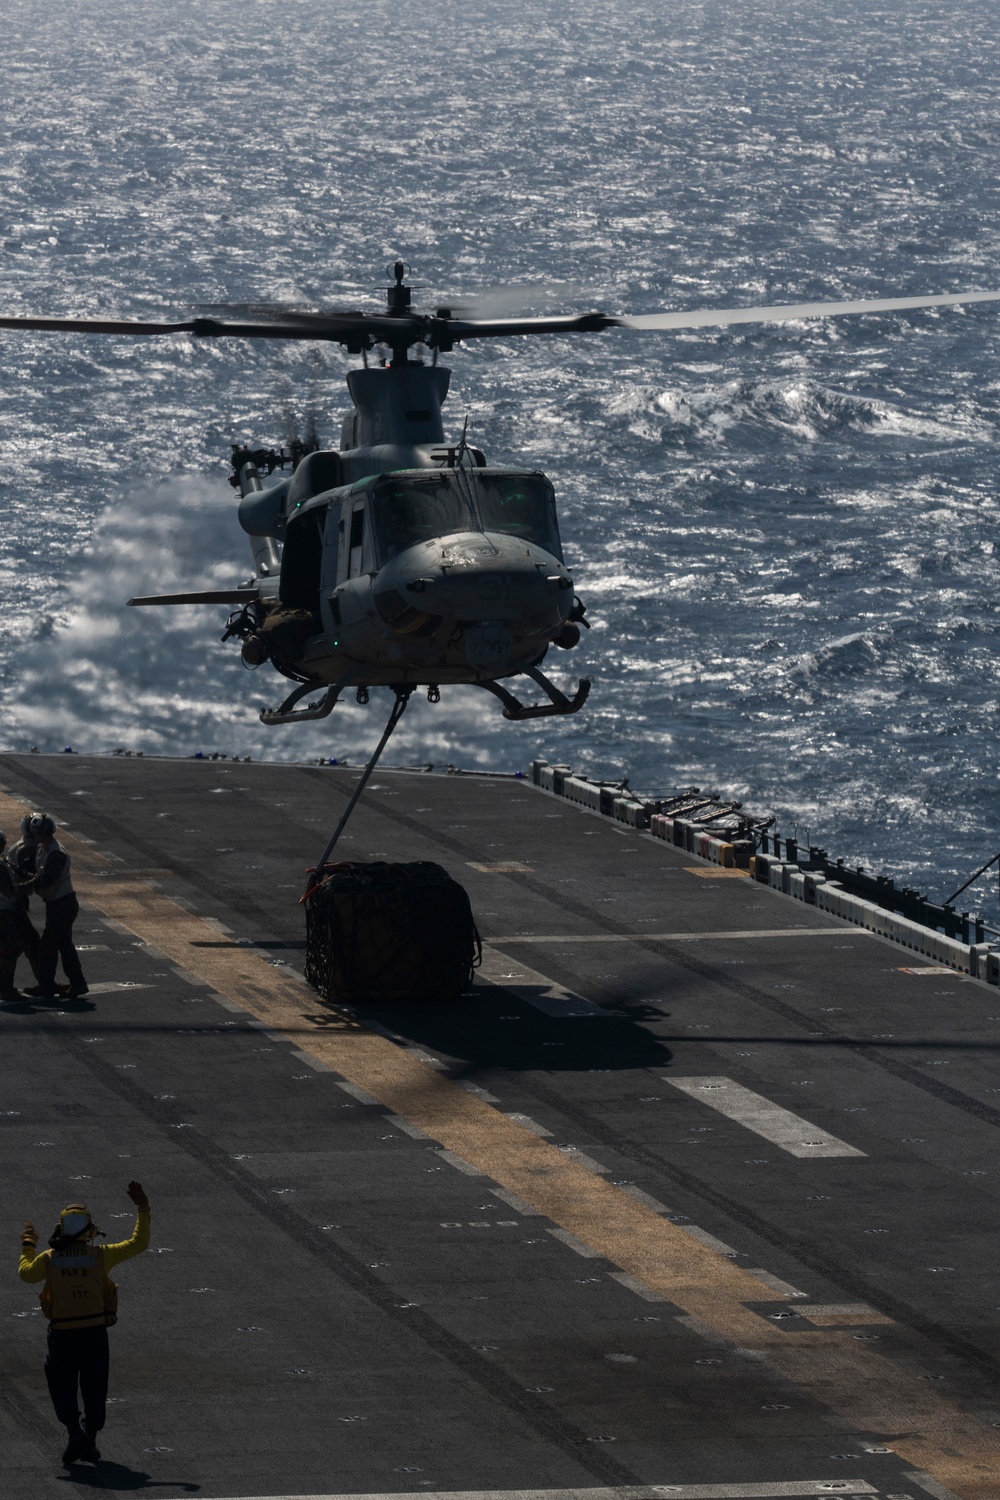 Helicopter Support Team training at sea